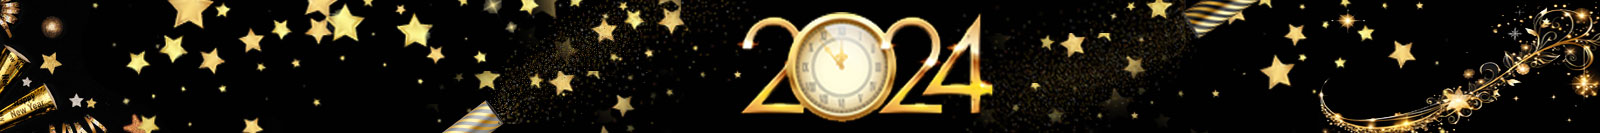 New Year's Day 2024